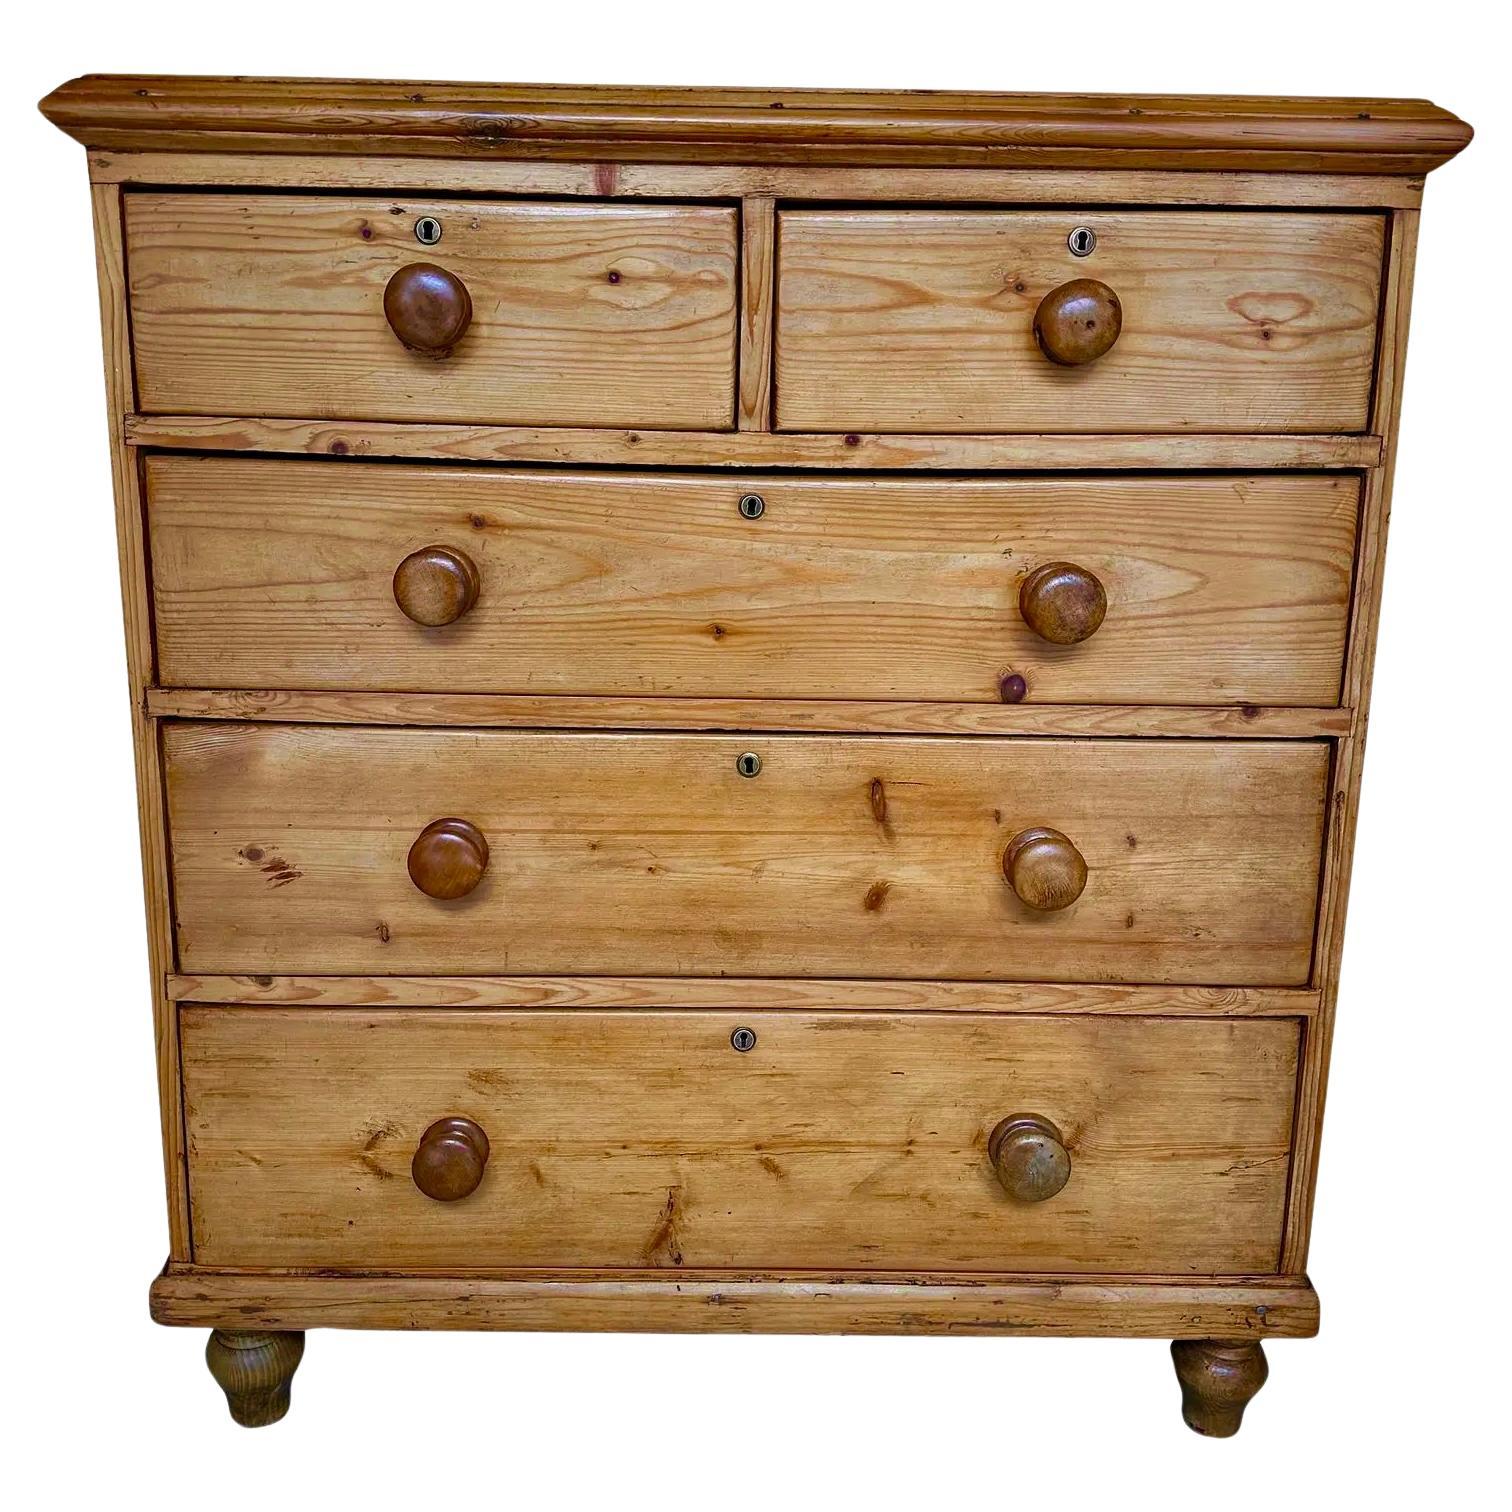 19th Century English Pine Chest For Sale